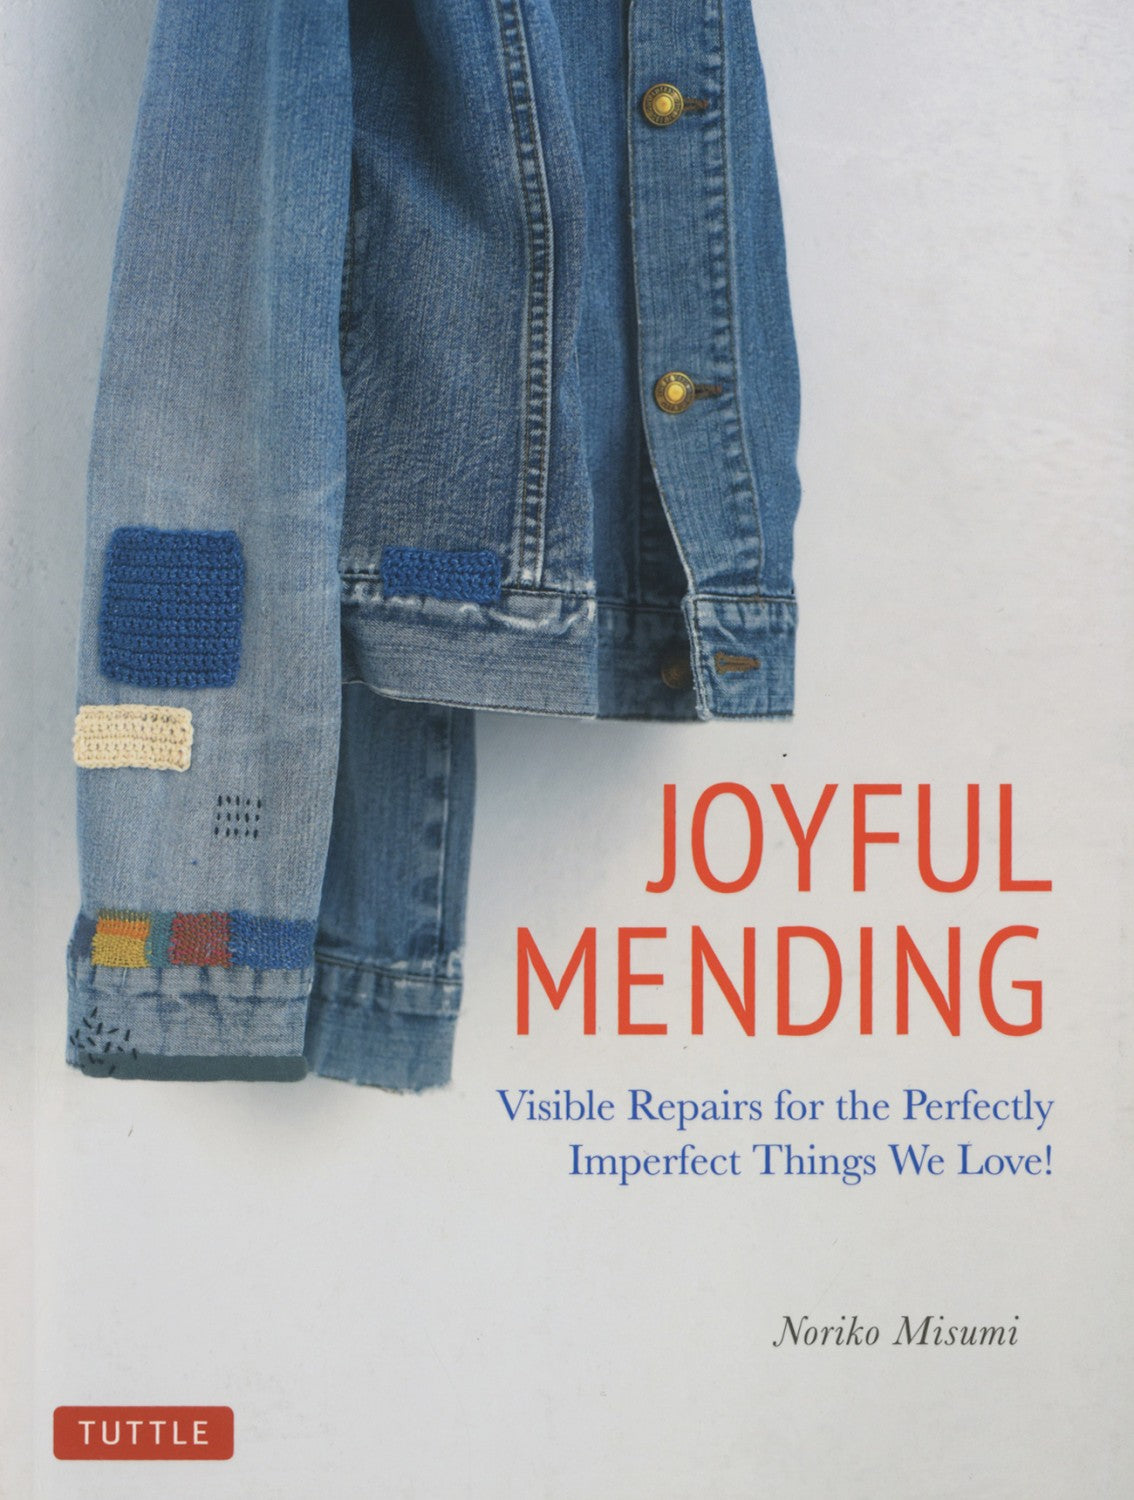 Joyful Mending - Visible Repairs for the Perfectly Imperfect Things We Love! -  By Noriko Misumi